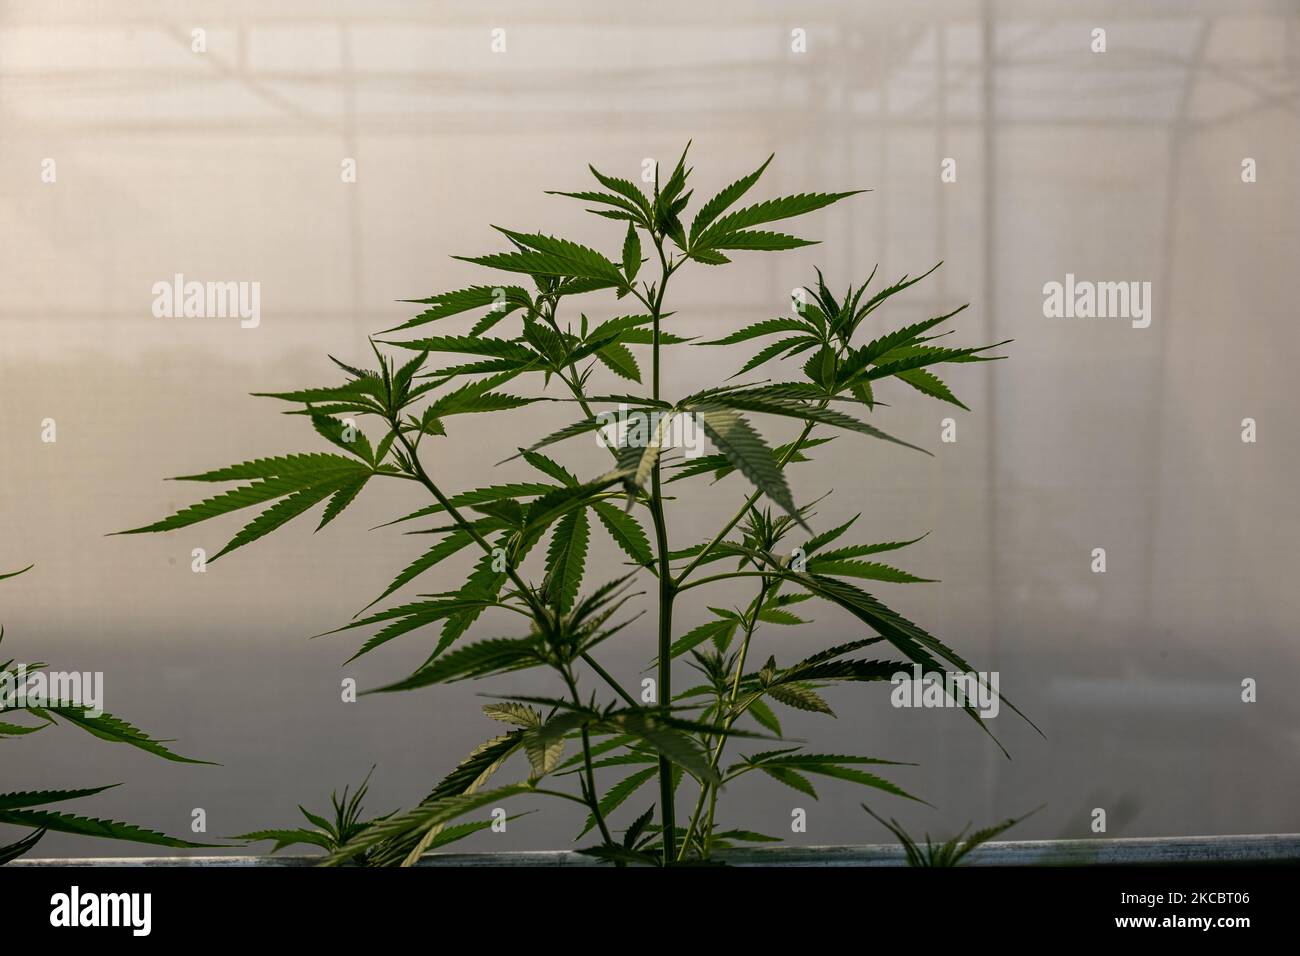 A marijuana plant on March 26, 2021 in Bangkok, Thailand. Cannabis is grown at this social enterprise under supervision of the Thai government. Thailand is moving to legalize cannabis and its derivates in the hope of becoming a global hub for medical marijuana. The government is now those who apply to grow the crop, provided they comply with FDA regulations. (Photo by Thomas De Cian/NurPhoto) Stock Photo